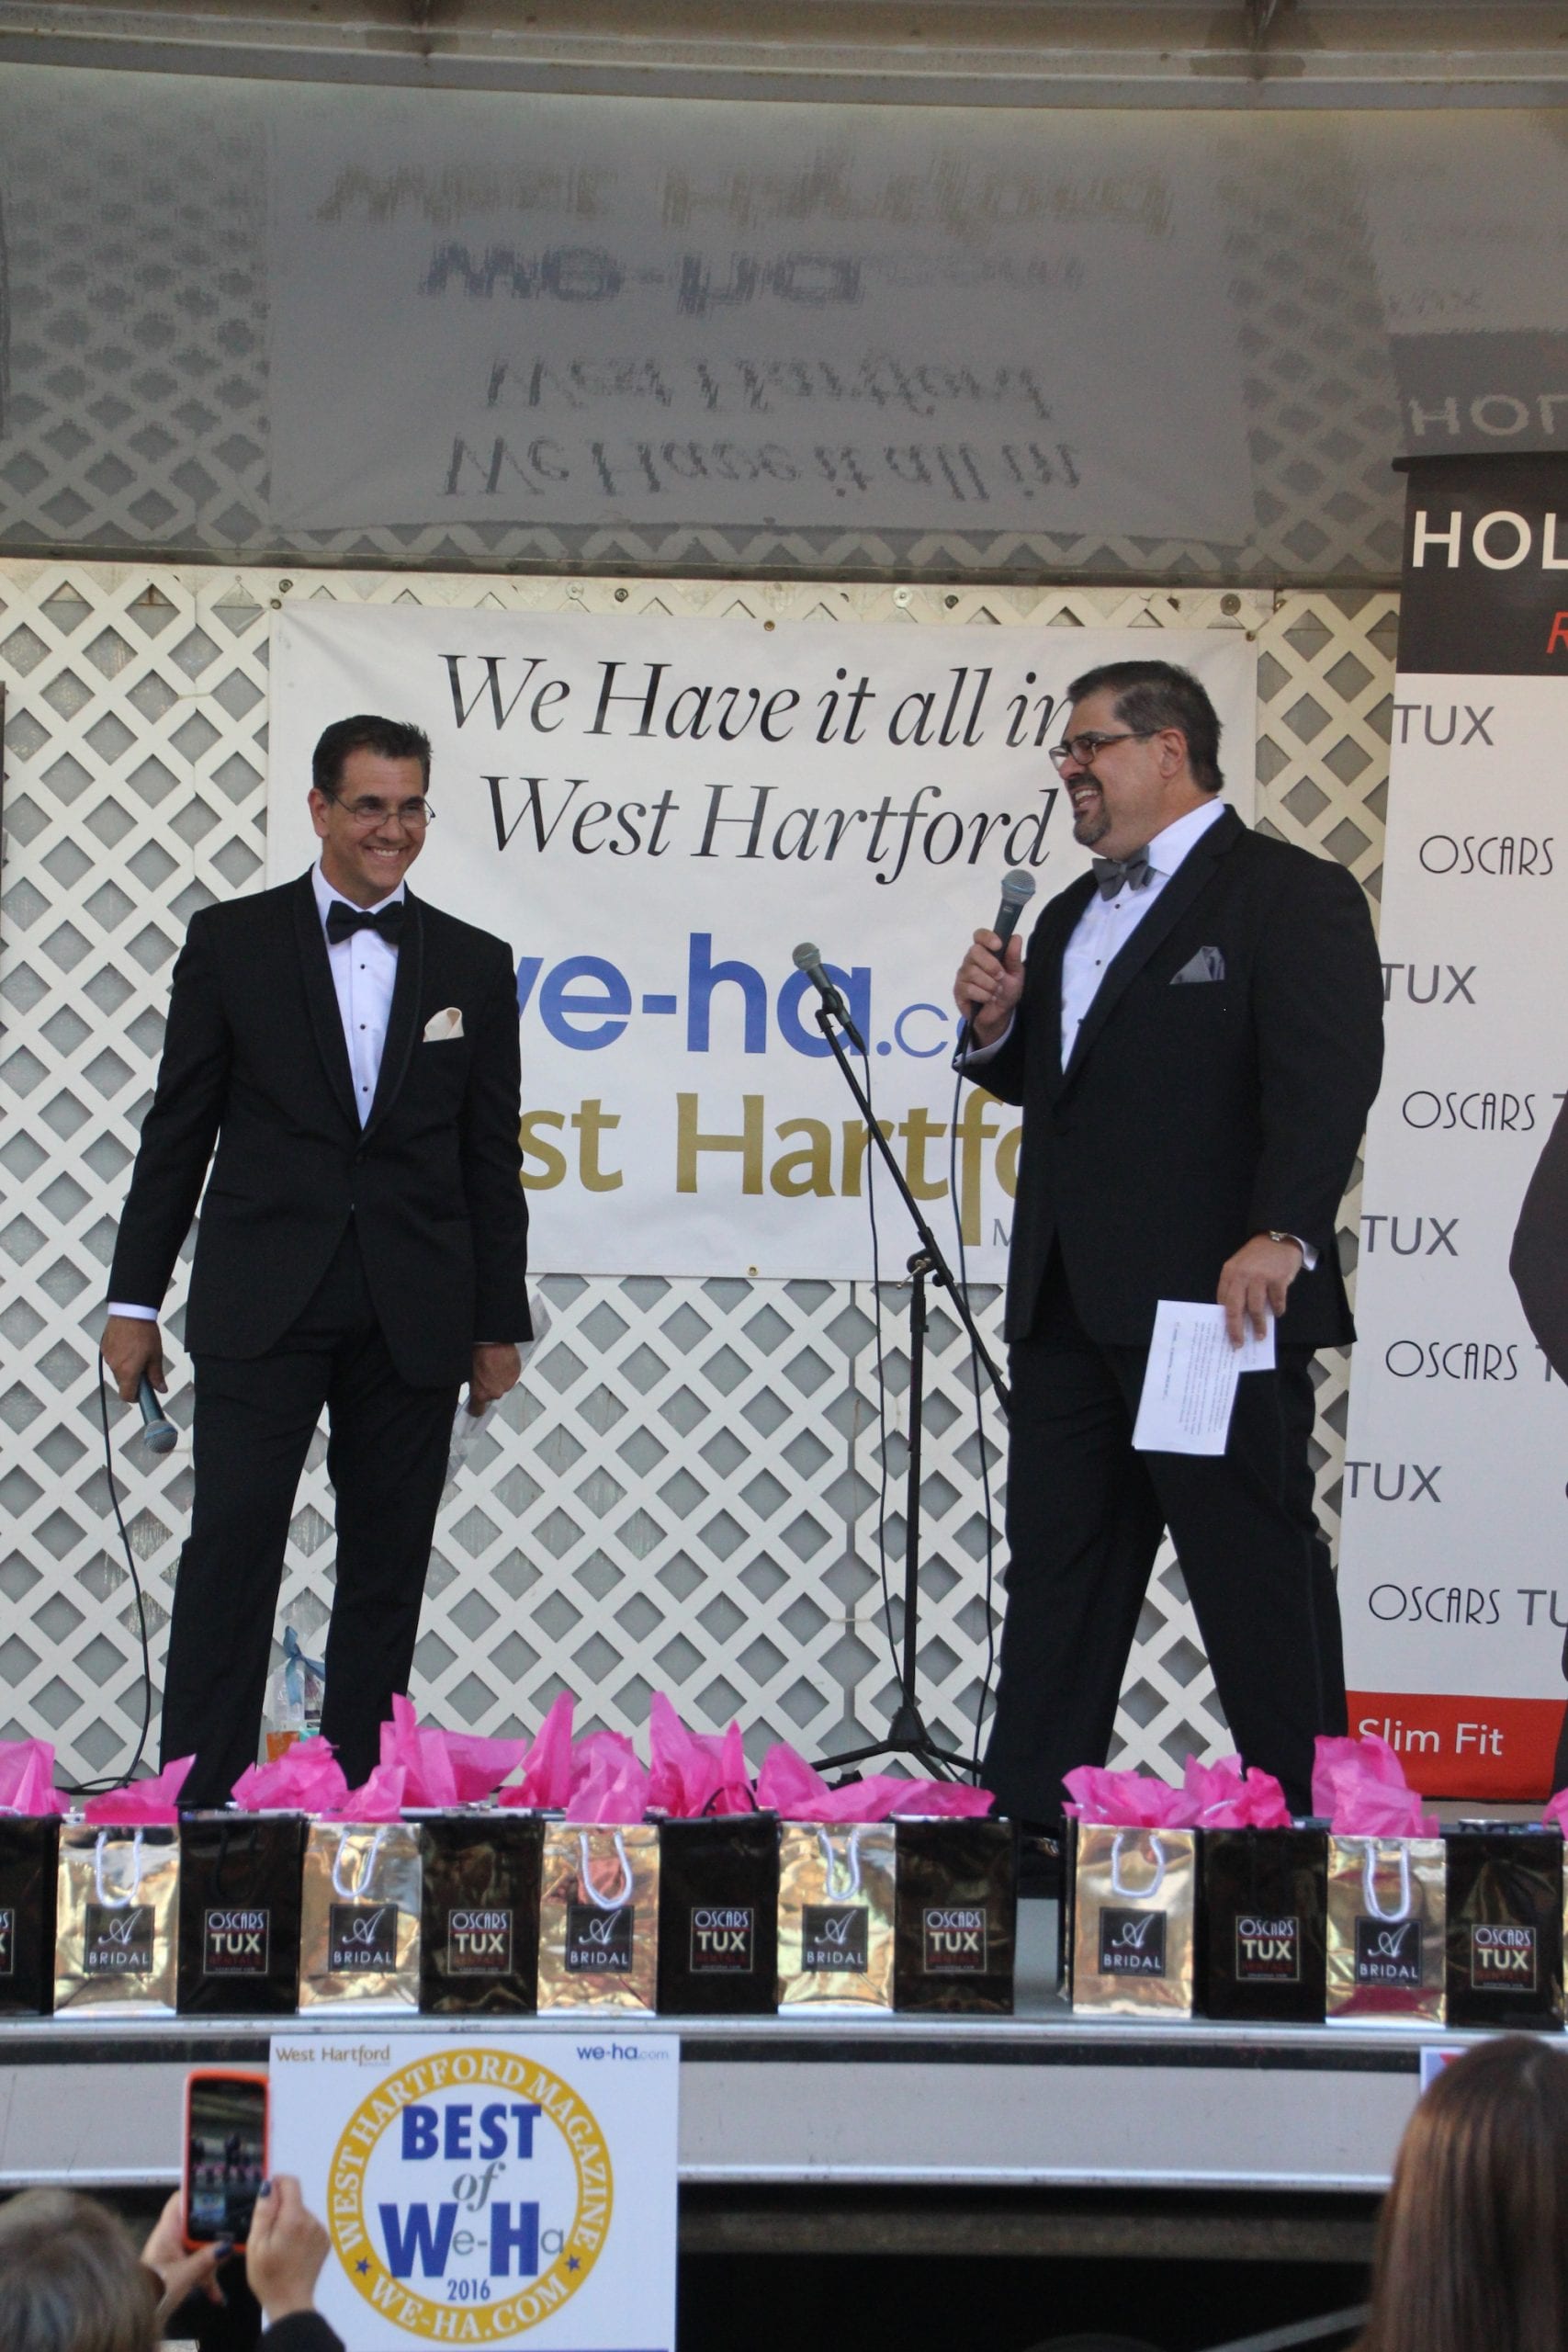 Fashion Show kicks off the Sale Days in West Hartford Center on the Town of West Hartford Showmobile stage on June 23, 2016. Ody Sosa, co-owner of Argelia Novia Bridal and the emcee for Oscars Tux shared the stage. Photo credit: Dylan Carneiro